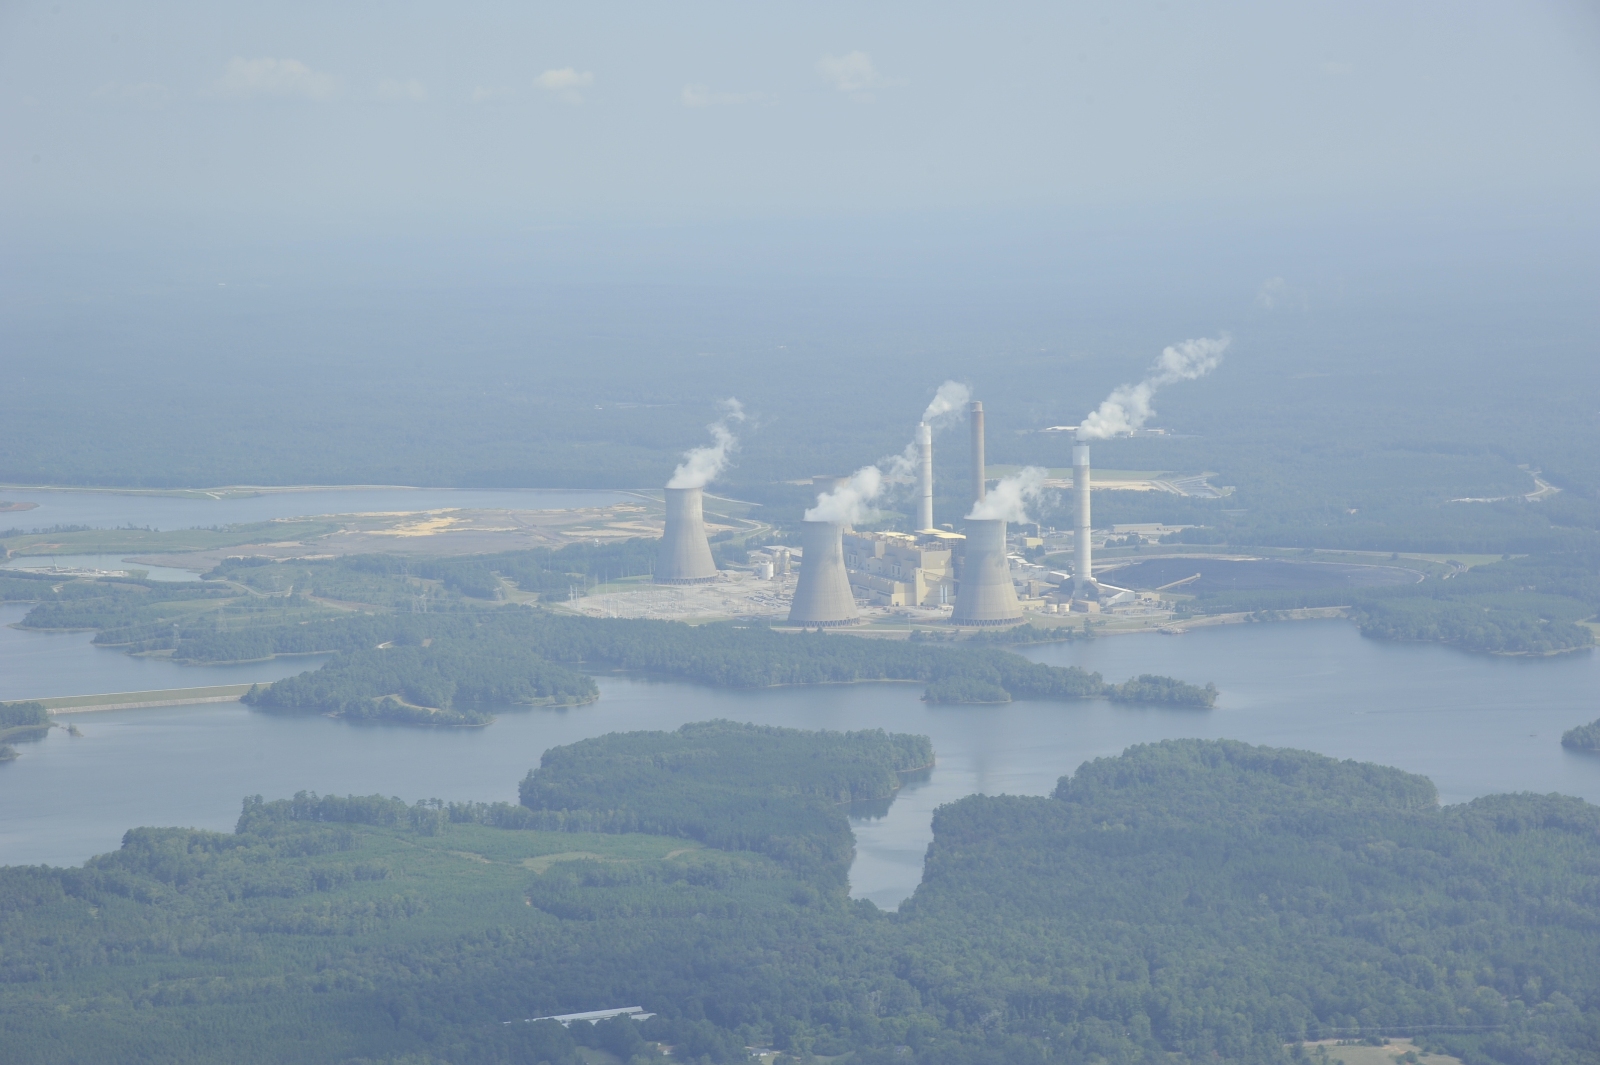 An aerial view of a coal-fired power plant in Juliette, Georgia.